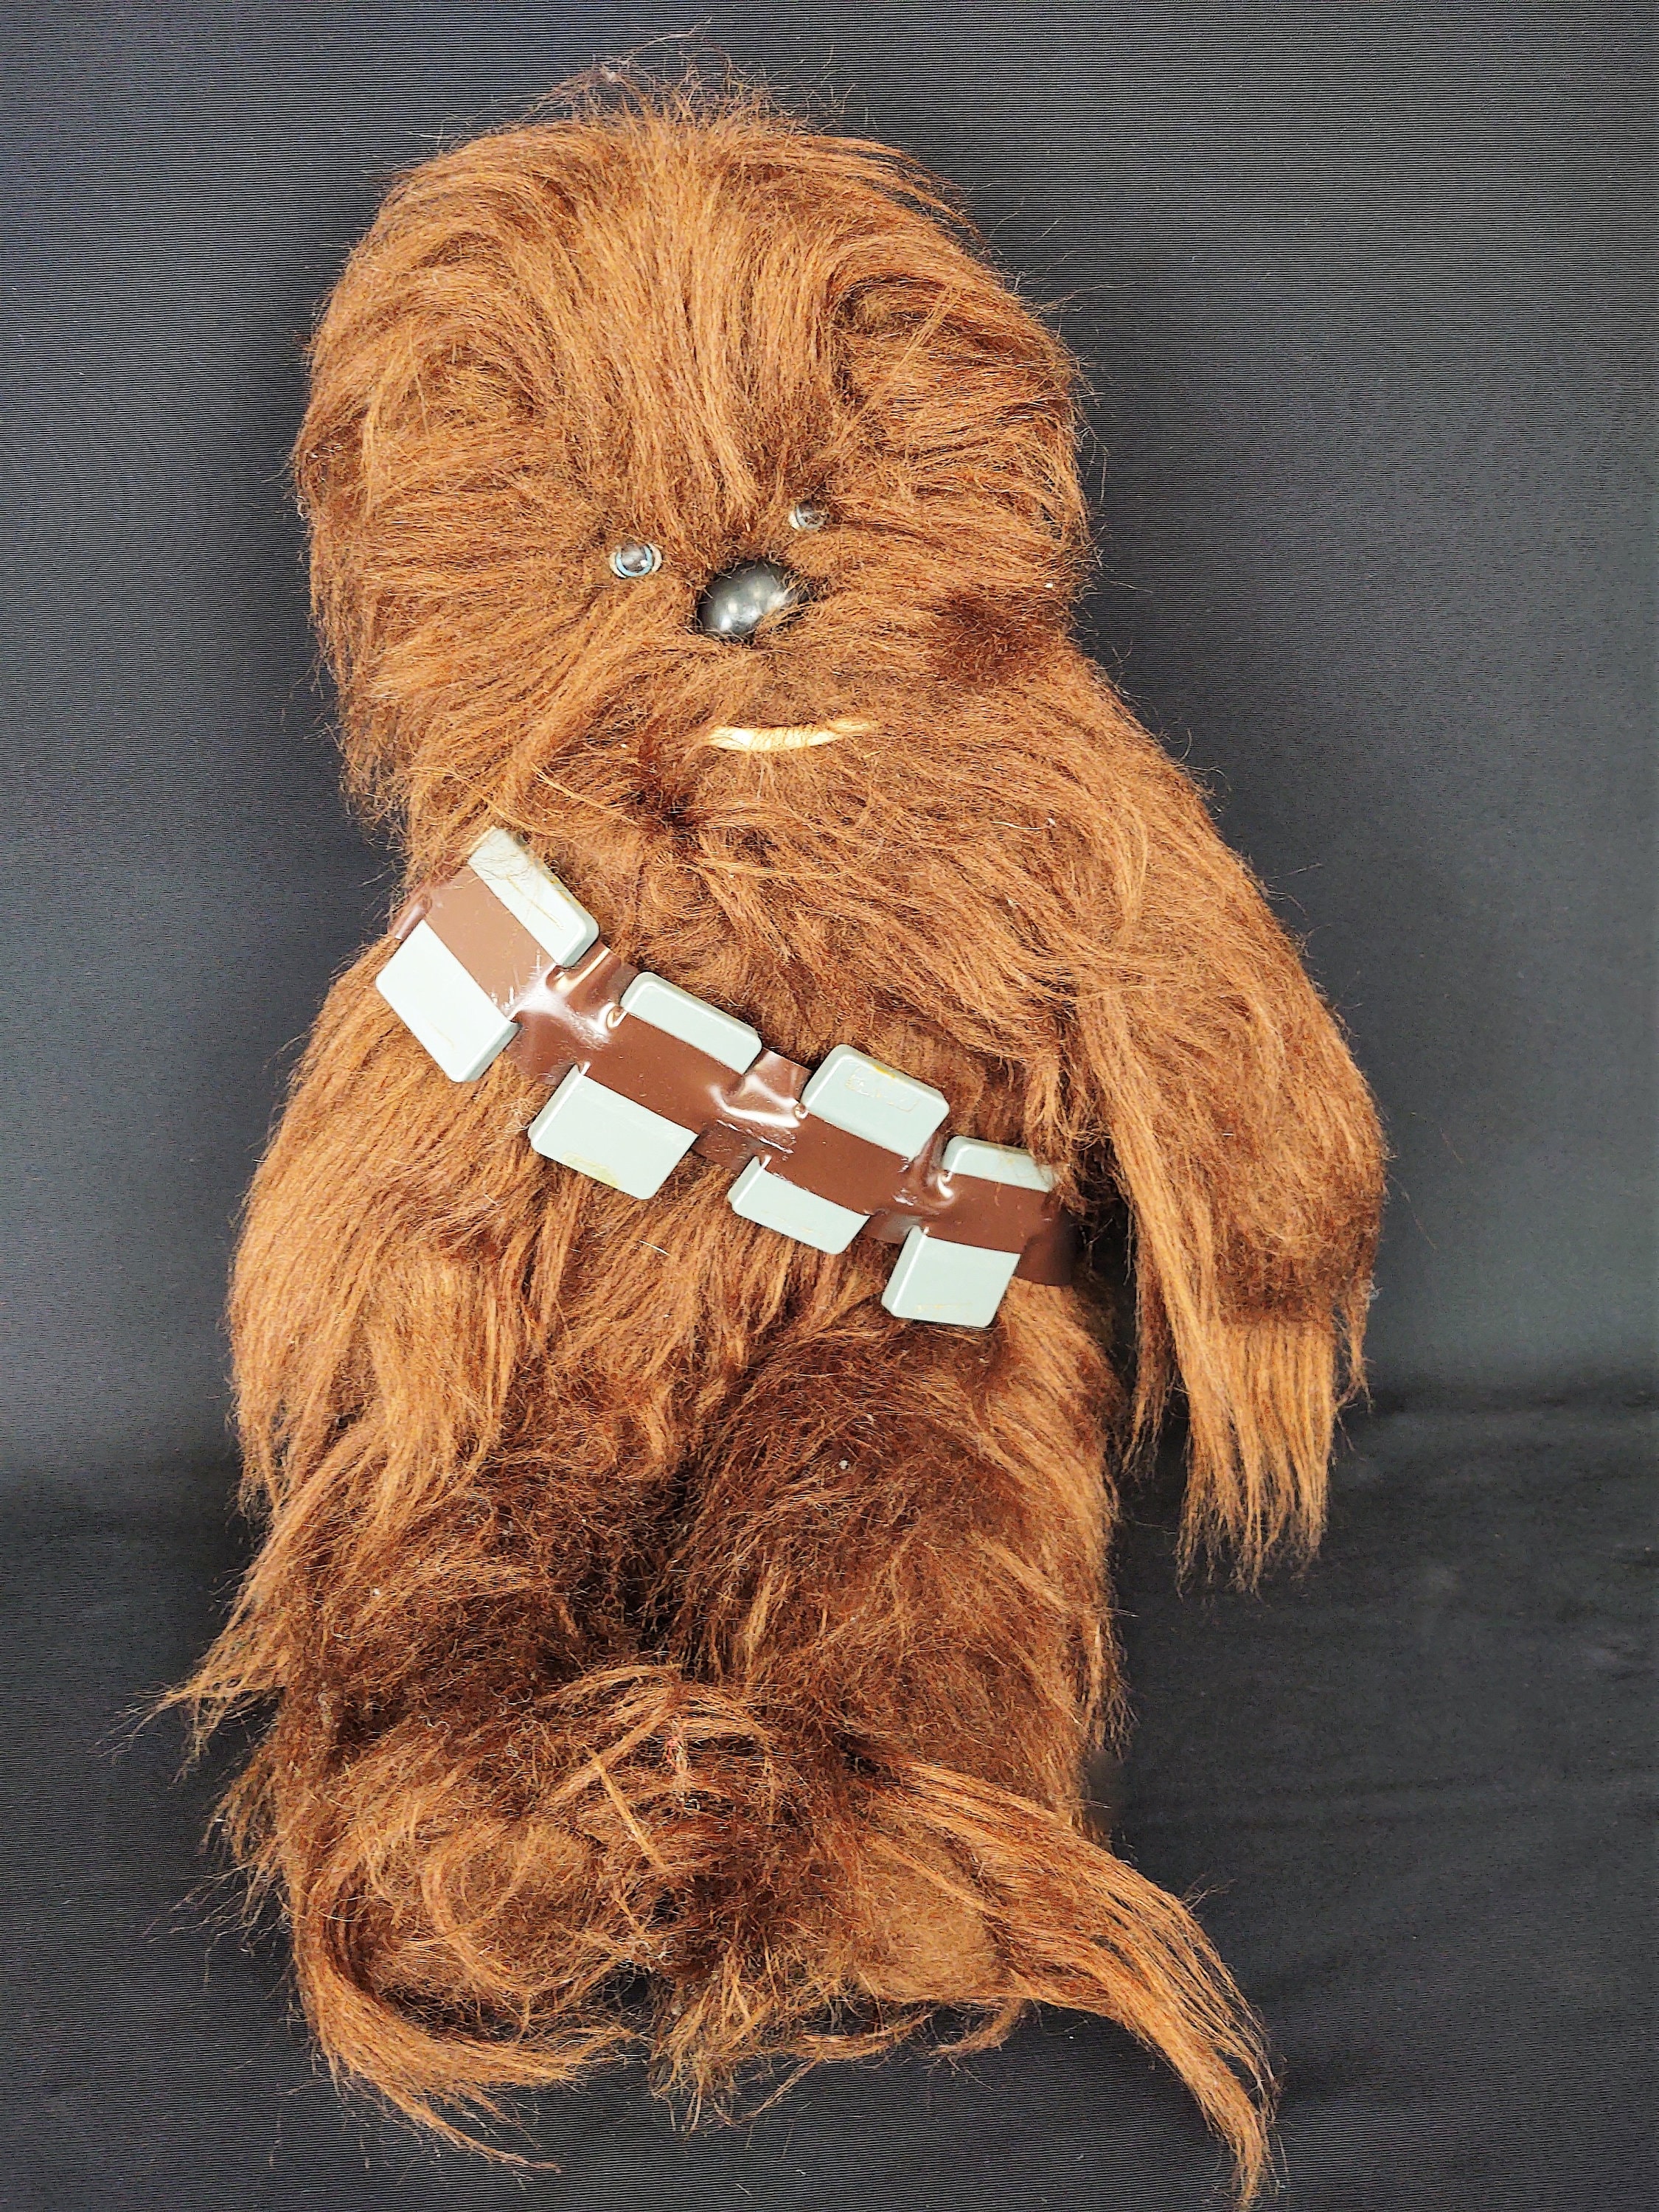 CHEWBACCA Star Wars Plush 1977 with Bandolier by Kenner